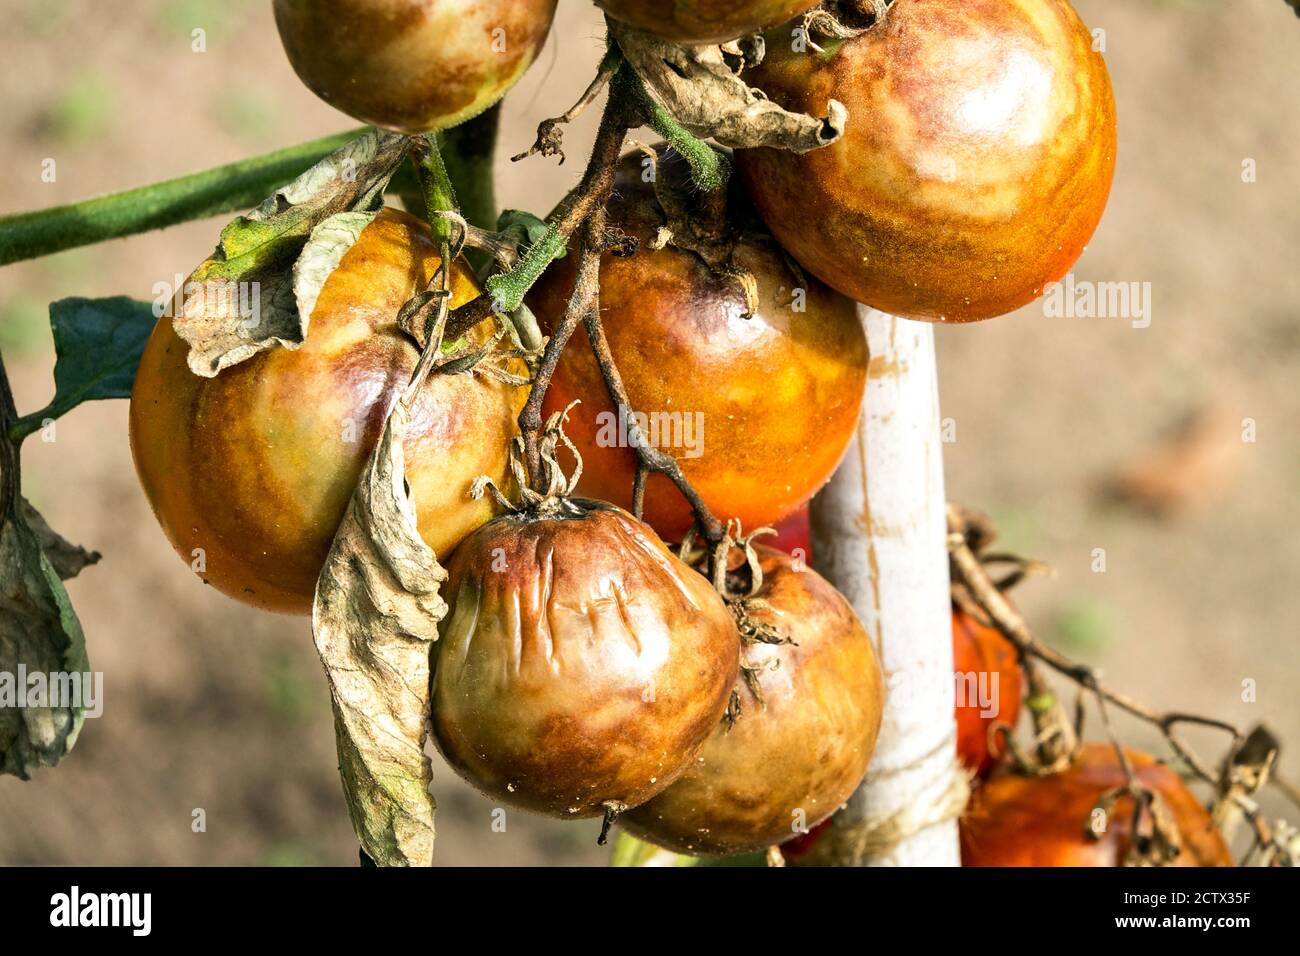 Tomato blight Tomatoes Problems Blight tomatoes Caused by Late blight Disease of Solanum lycopersicum Infected Plant Mildews Phytophthora infestans Stock Photo